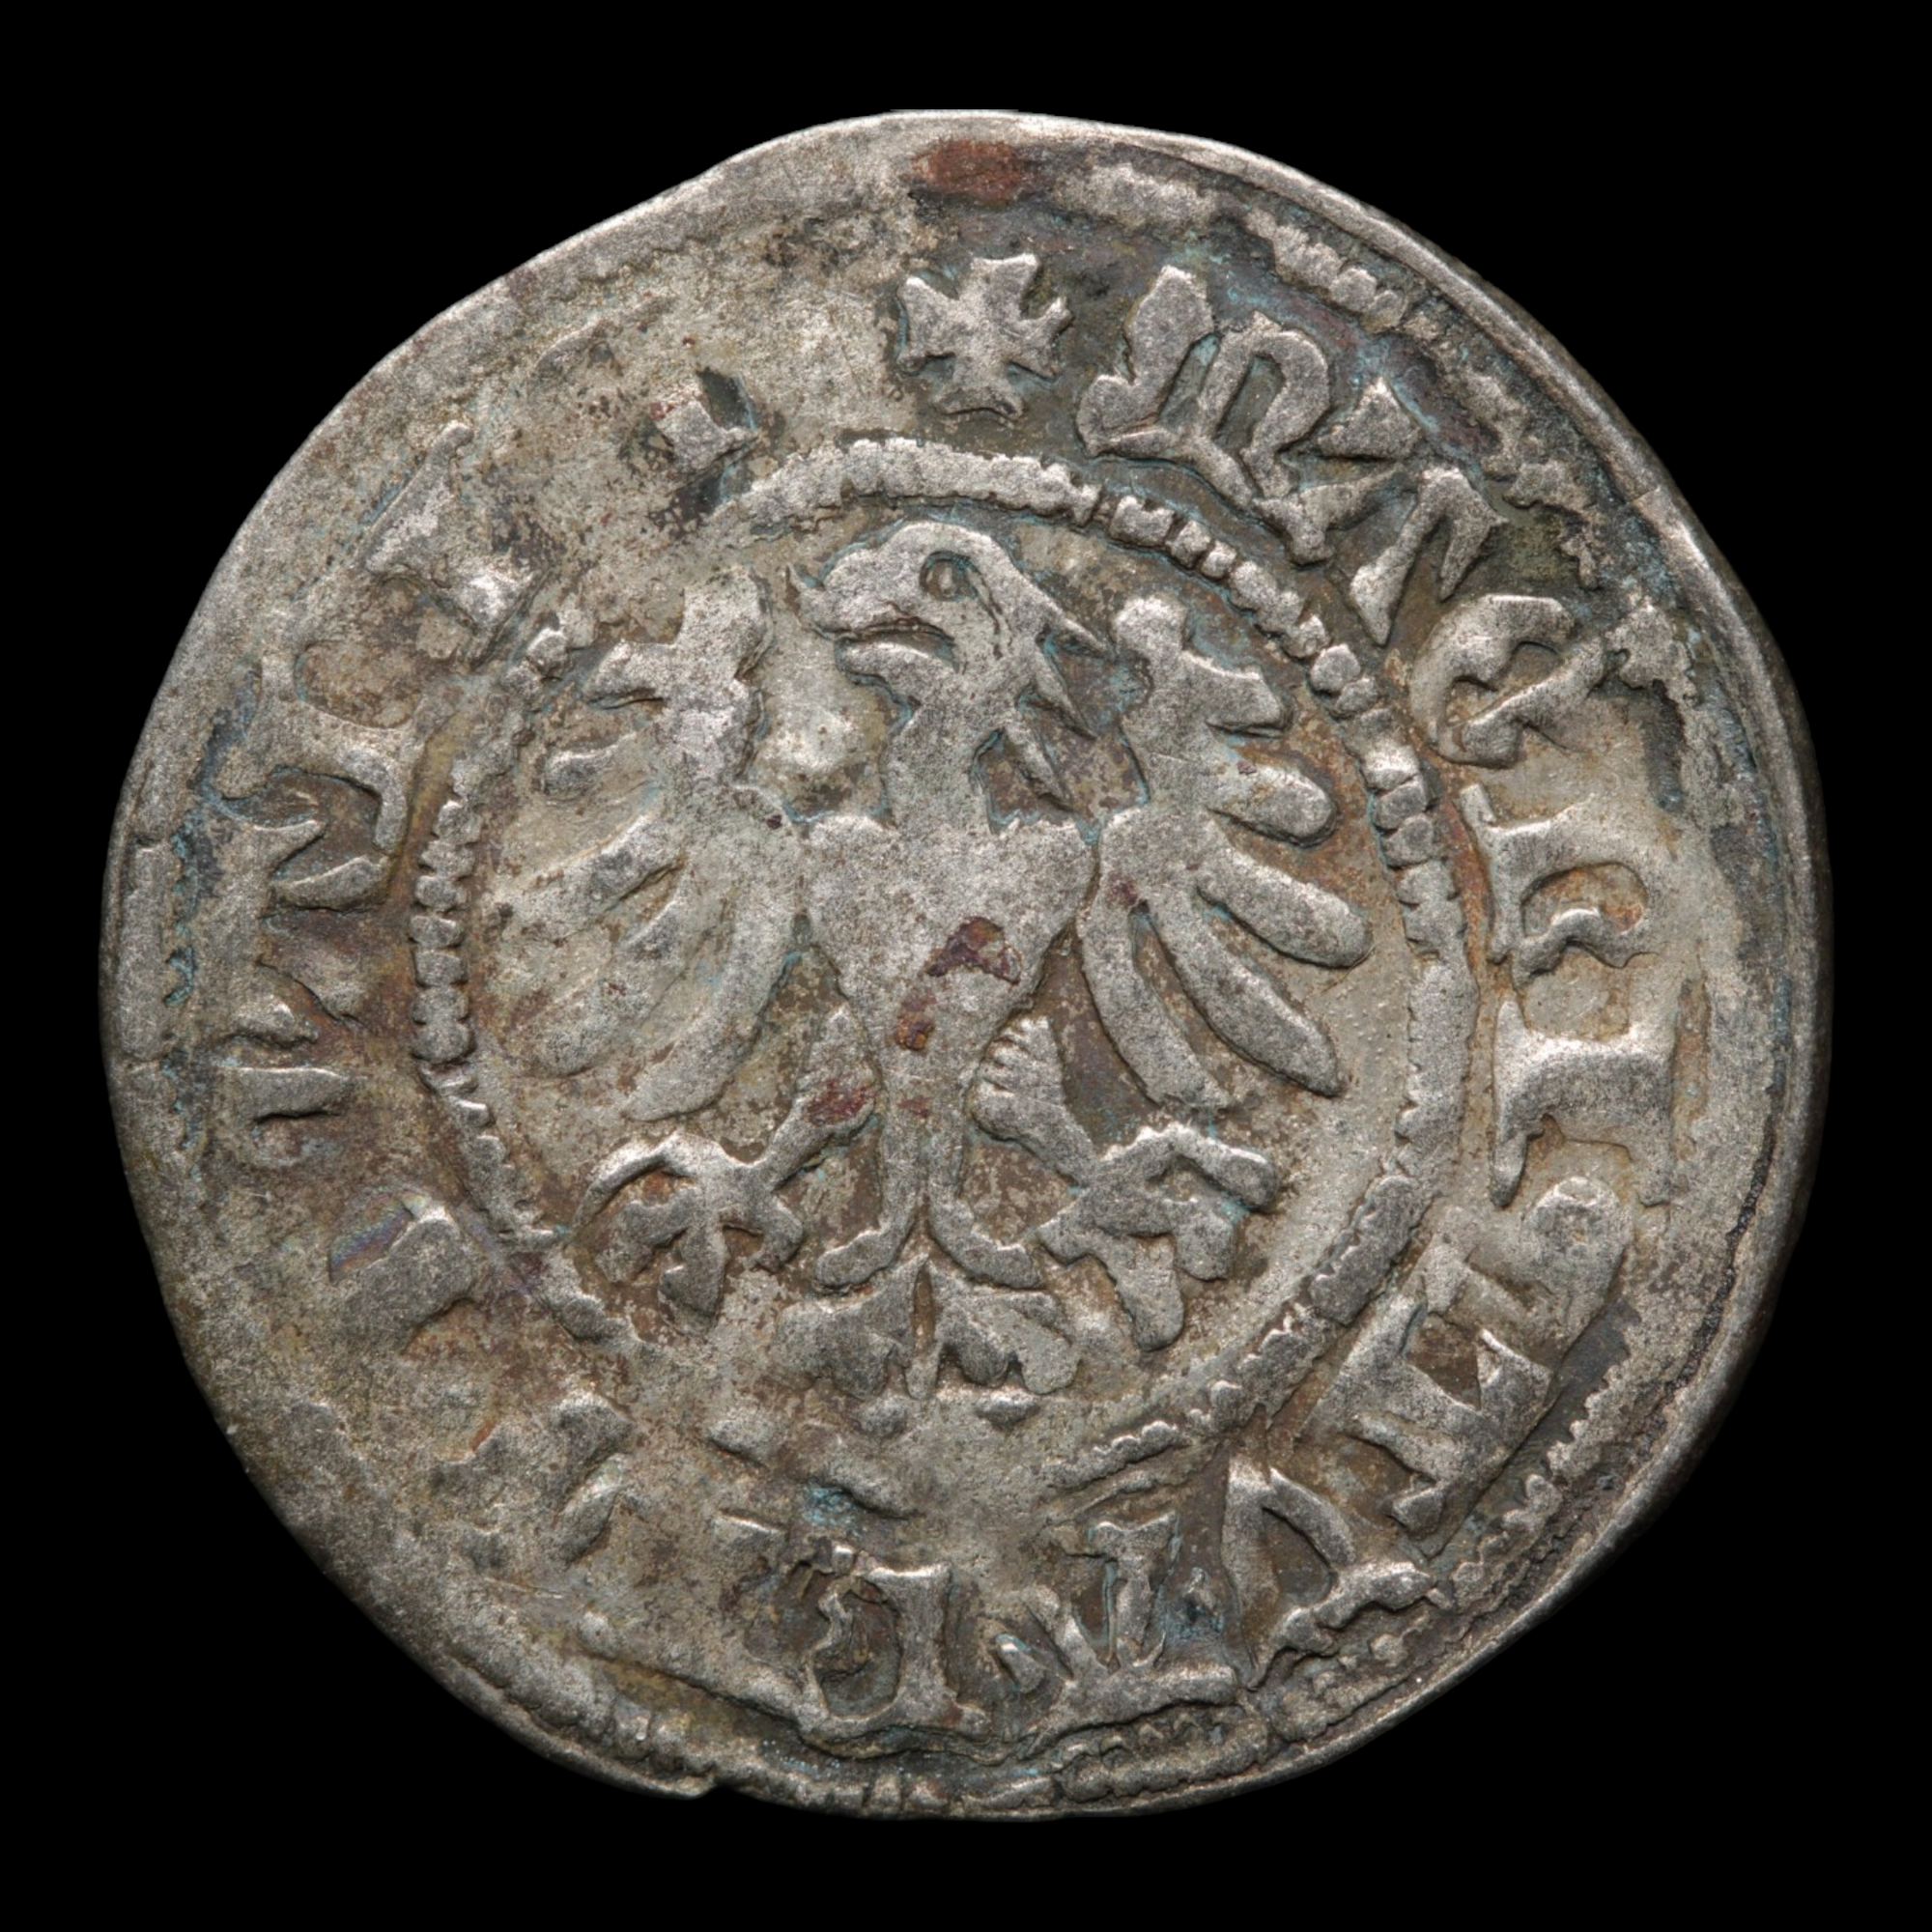 Grand Duchy of Lithuania, Sigismund I, Half Groat  - 1509 to 1518 CE - Eastern Europe - 10/19/23 Auction